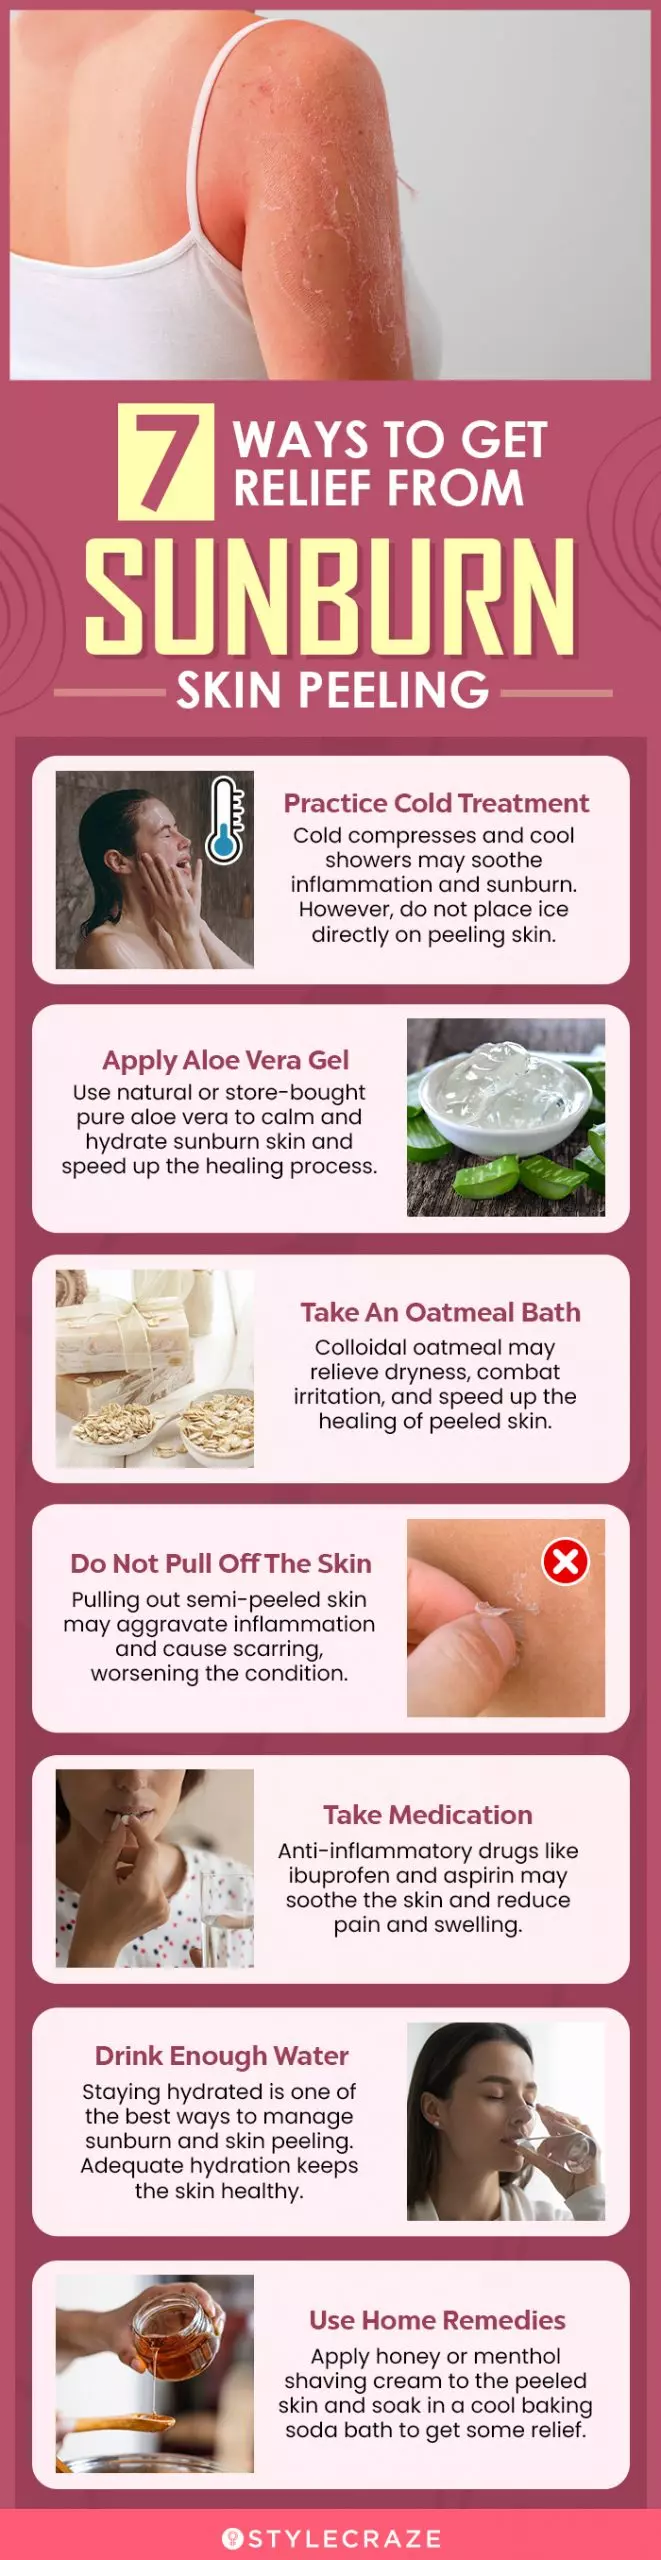 7 ways to get relief from sunburn skin peeling (infographic)